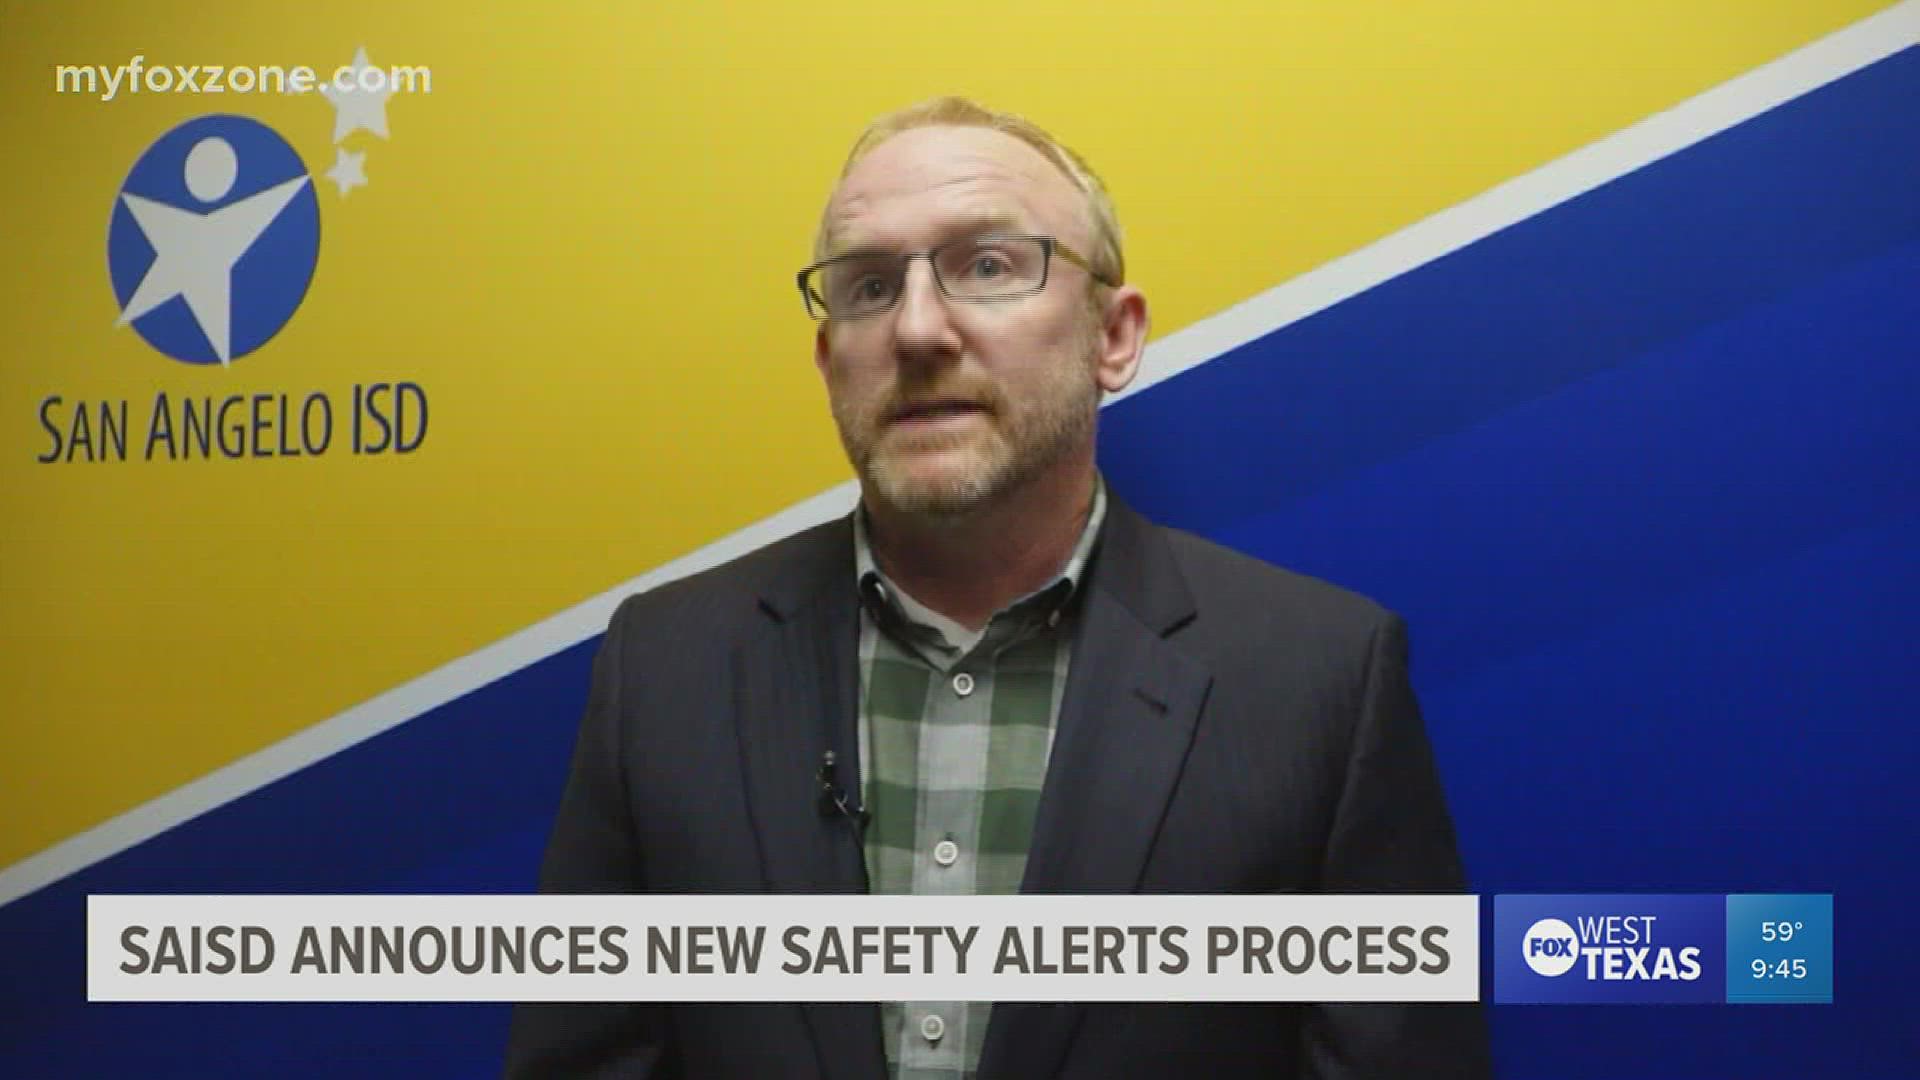 The new alert process involves faster notification of critical safety information through text and email as well as through a dedicated safety alerts webpage.